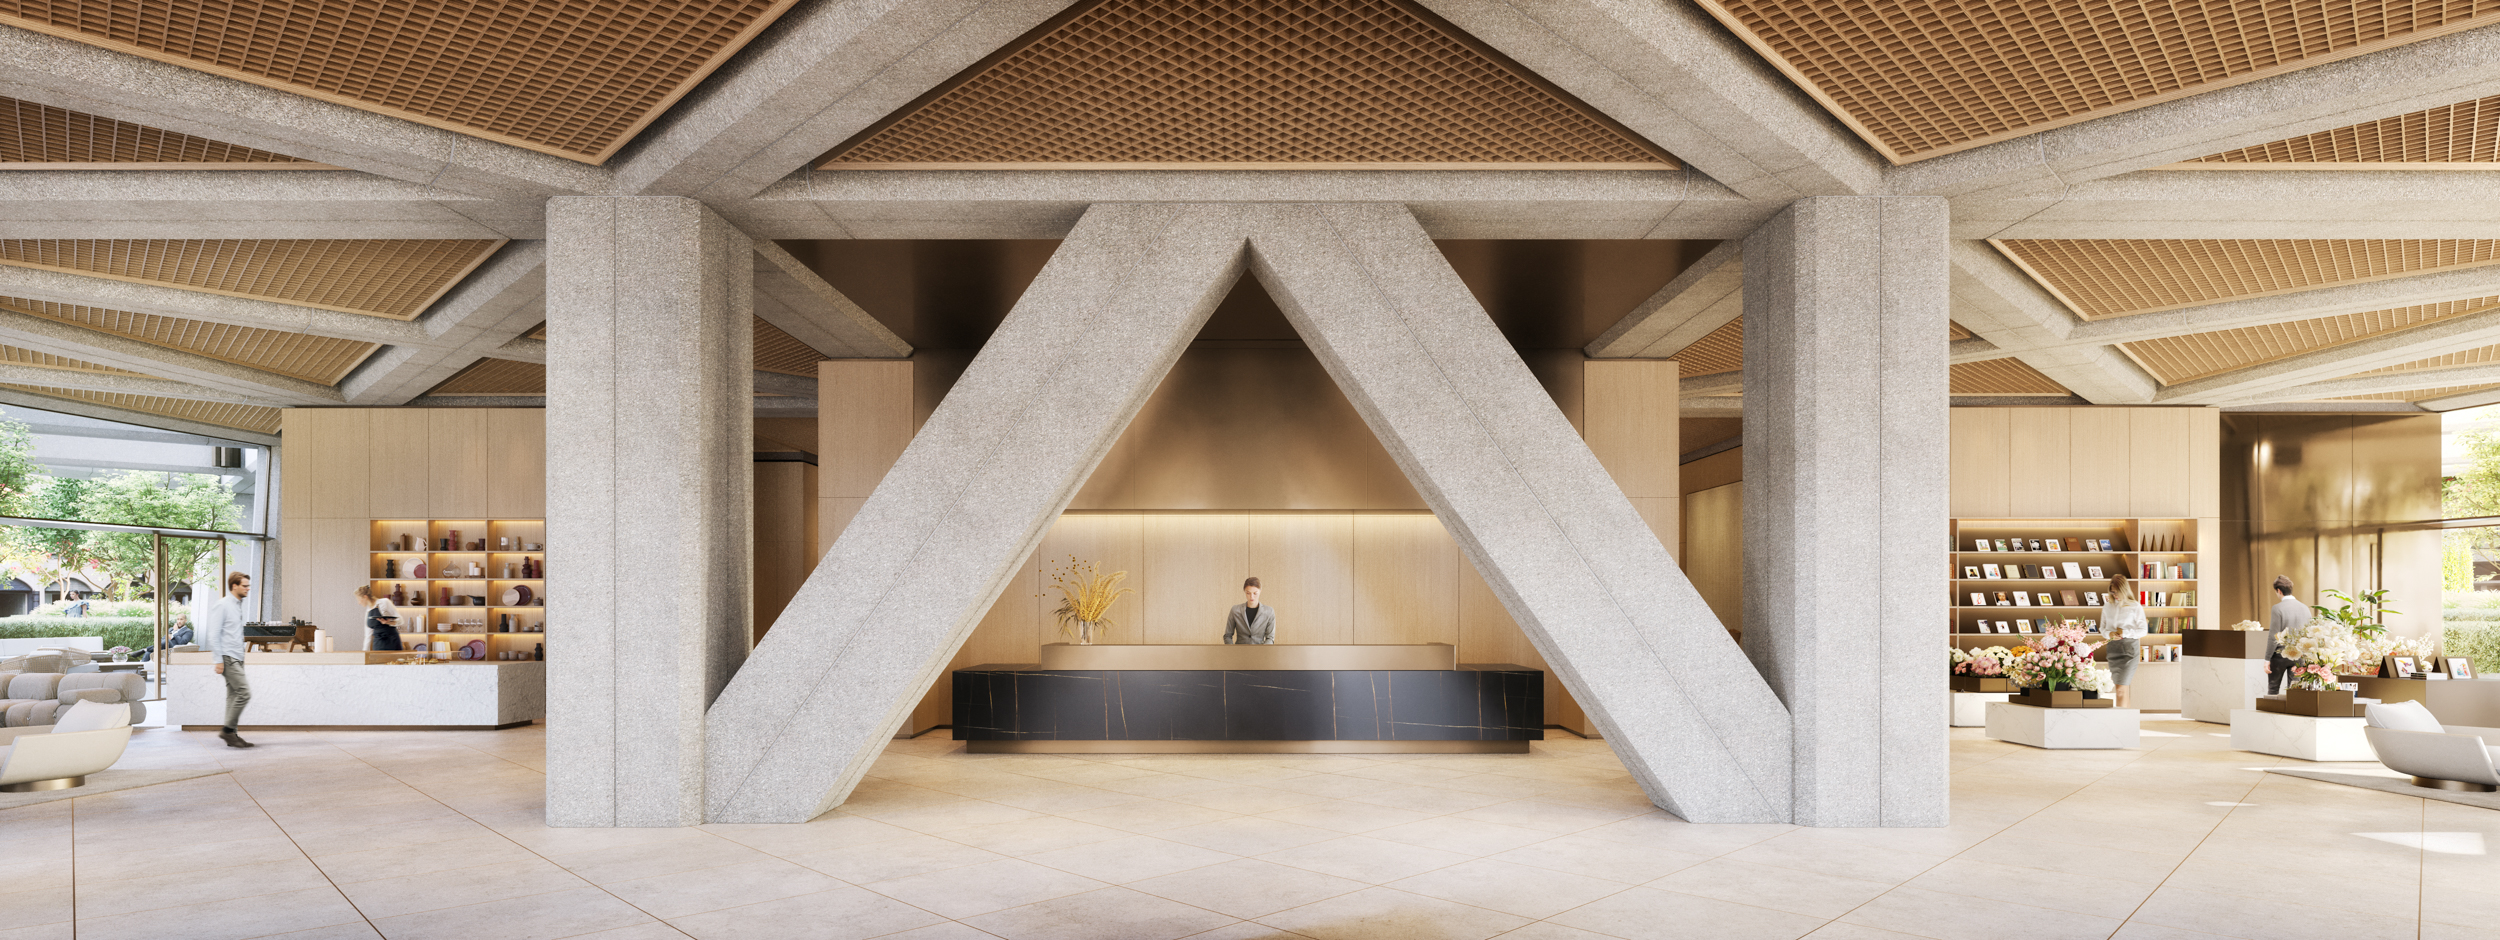 Transamerica Pyramid Lobby Reception view with the structural elements highlighted, rendering by DBOX